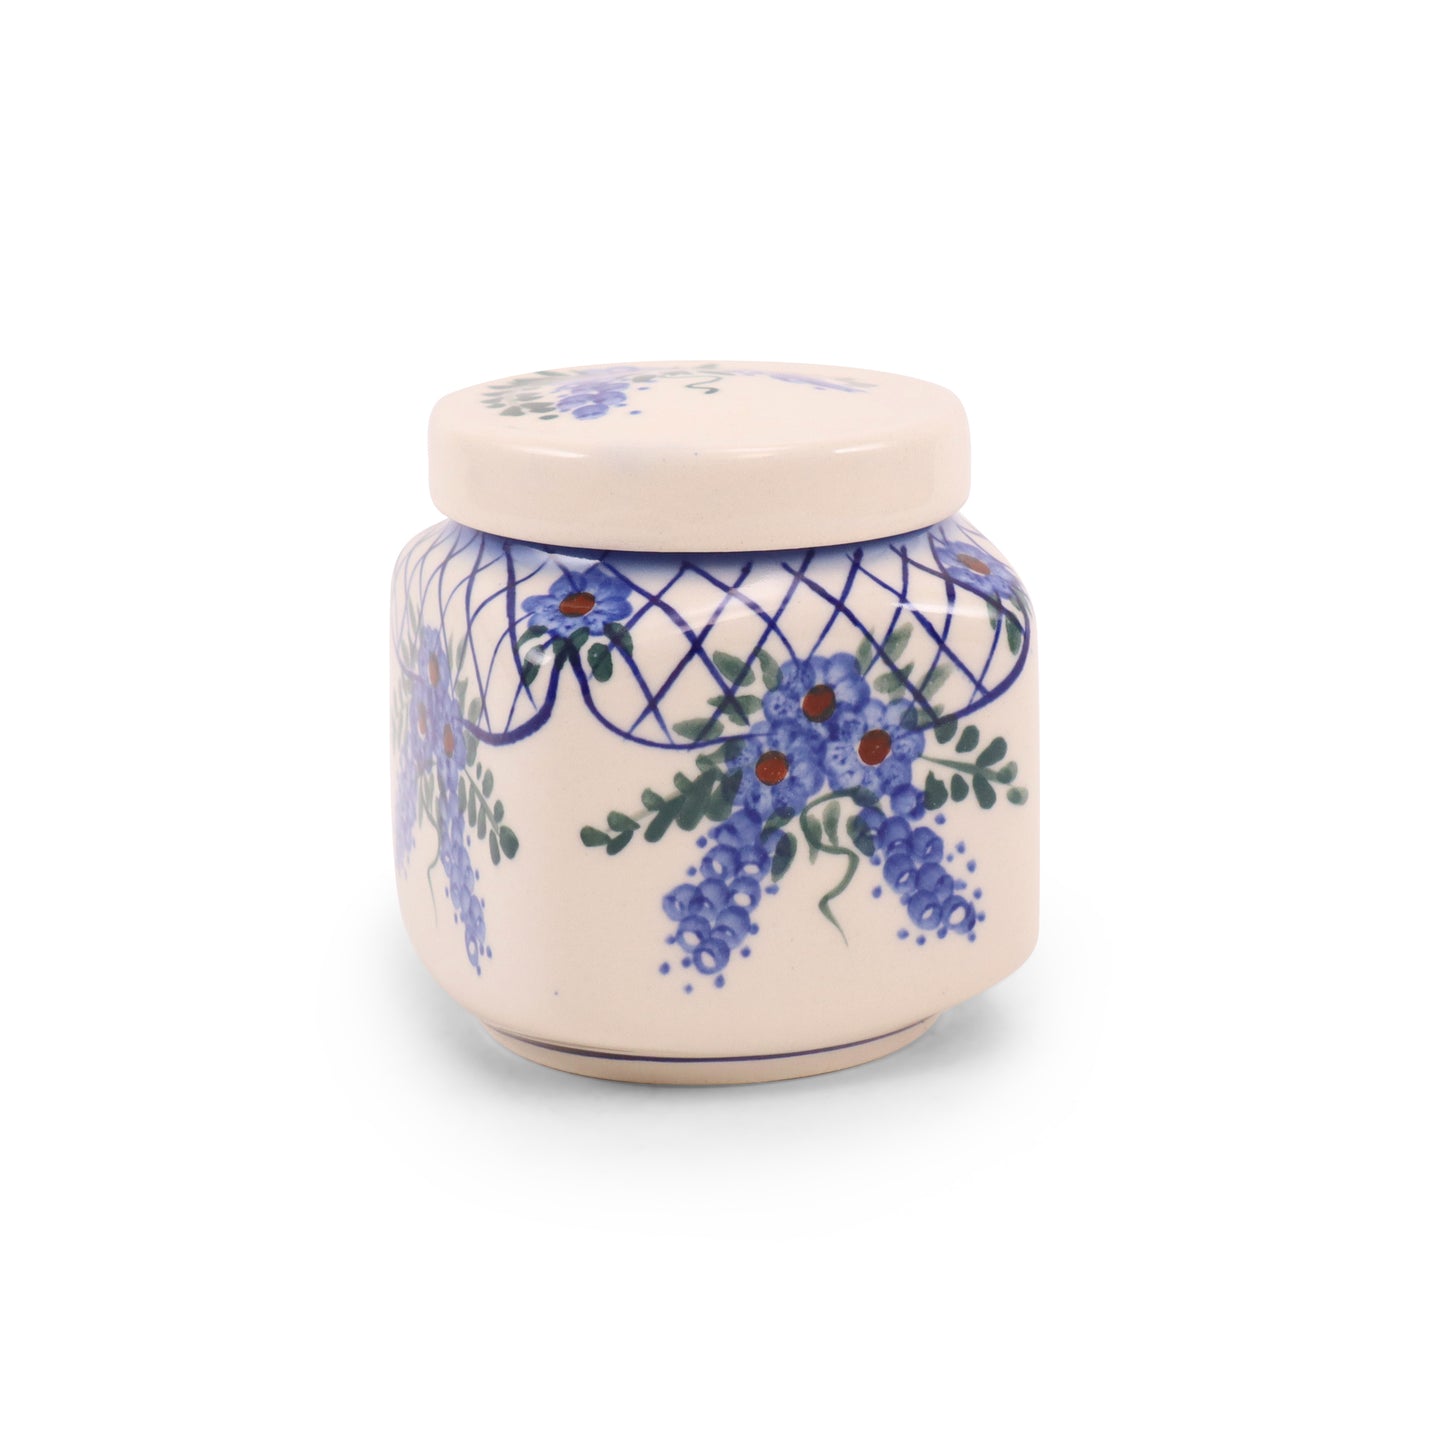 0.5L Small Square Canister. Pattern: Cobalt Lattice